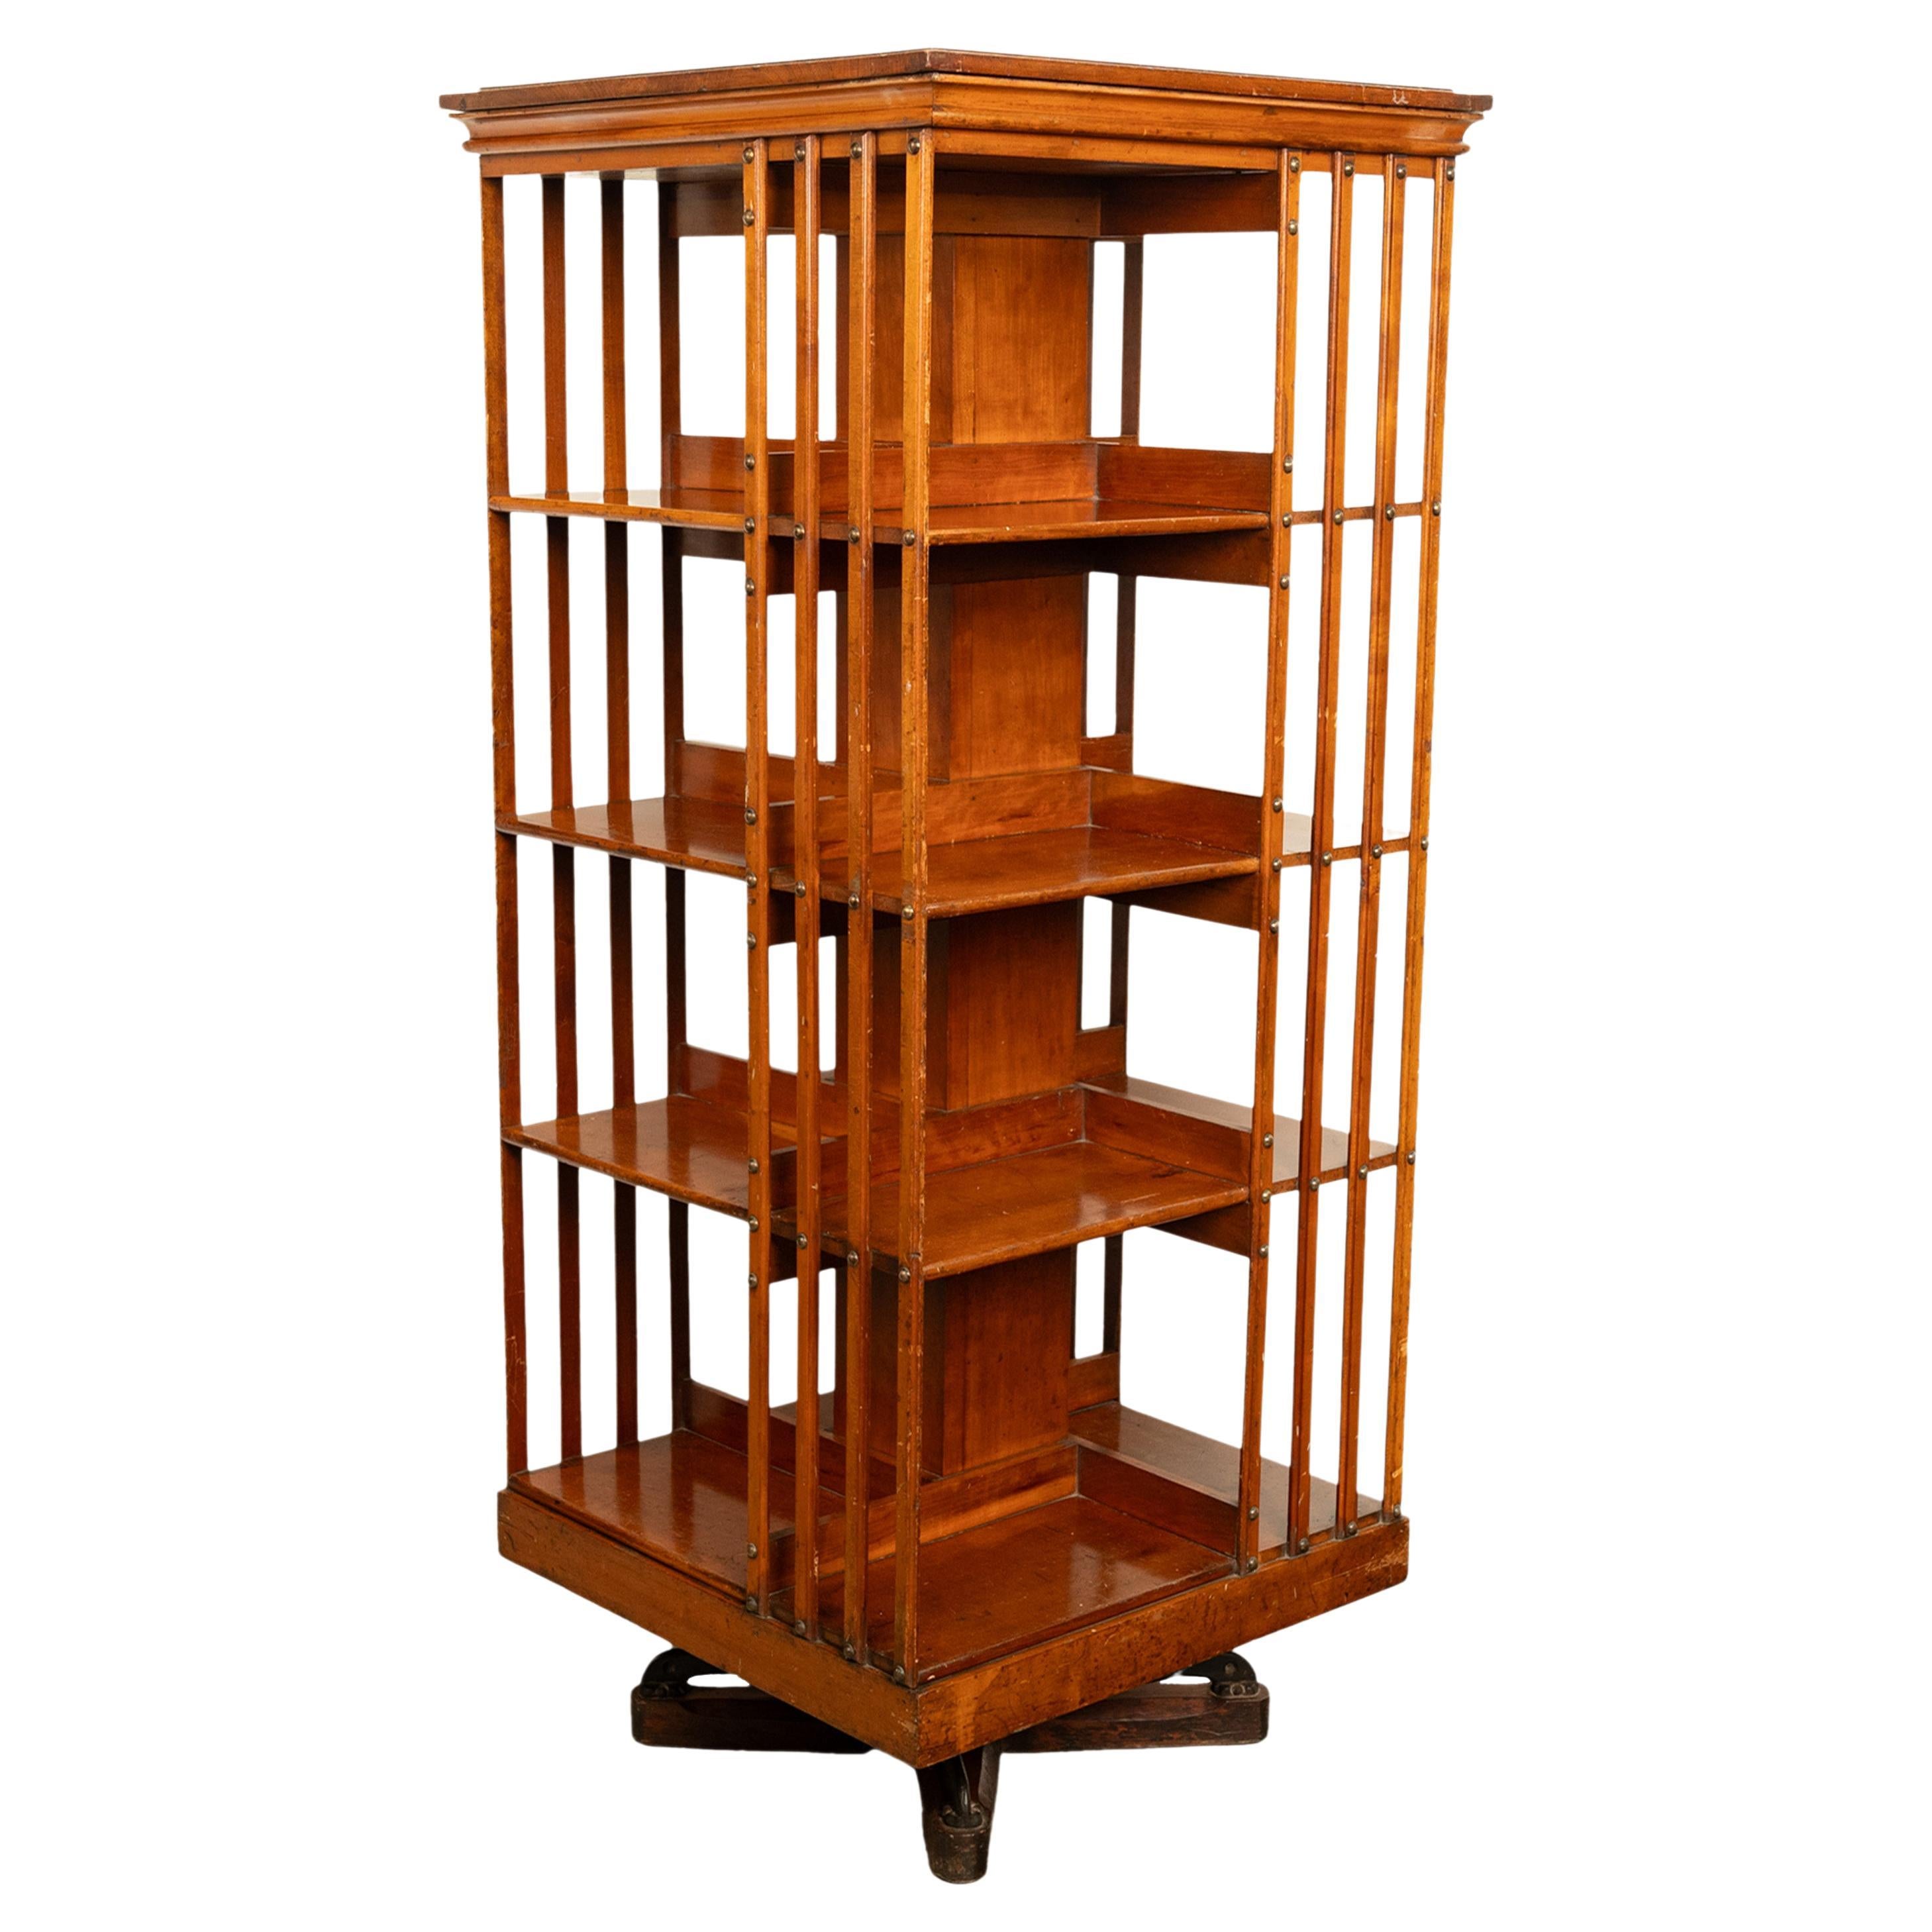 A good antique American walnut four tier revolving bookcase, by John Danner Co, Canton Ohio, 1877.
The four tier bookcase having tots of book storage on four sides, the bottom tier for oversize books, the bookcase turns on a quadraped revolving